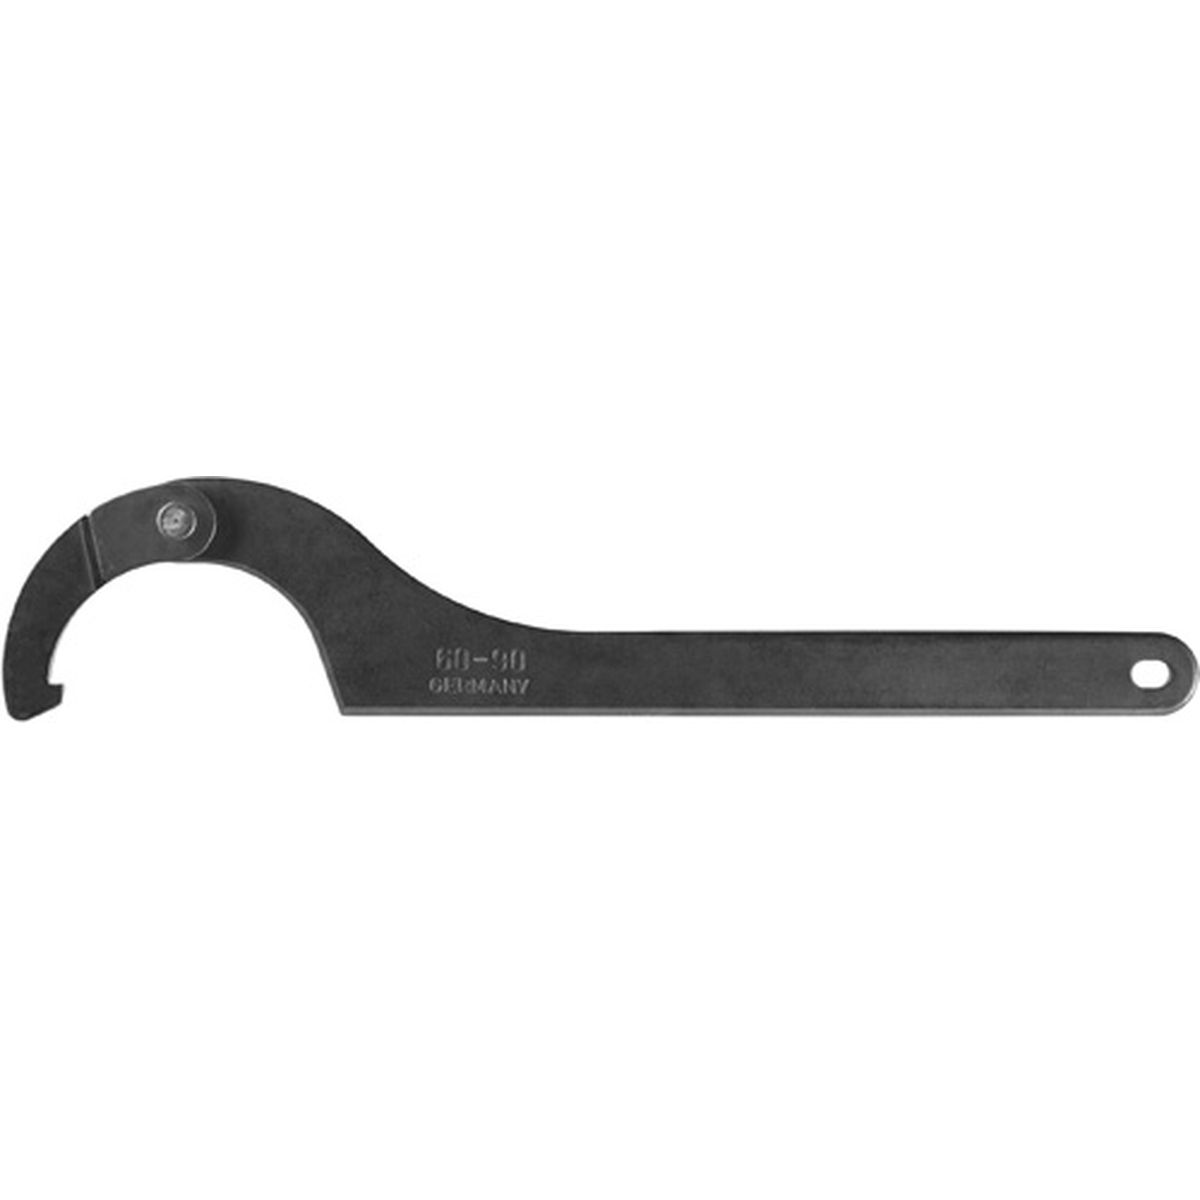 775C 90-155 Hinged hook wrench with nose AMF